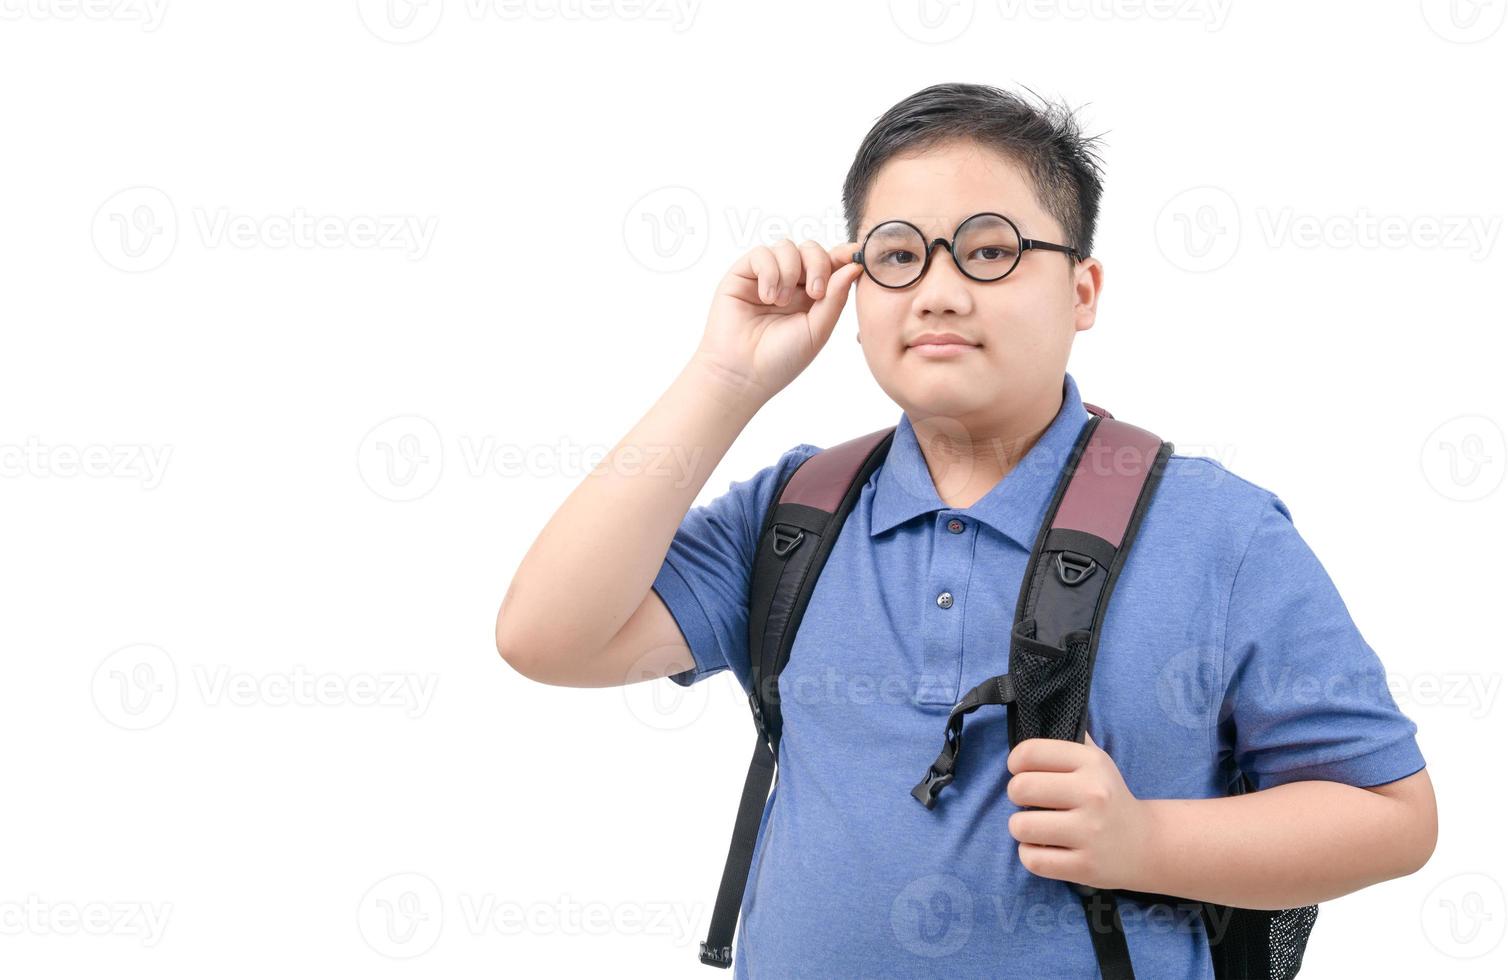 Handsome boy student holding glasses and carrying a school bag isolated photo